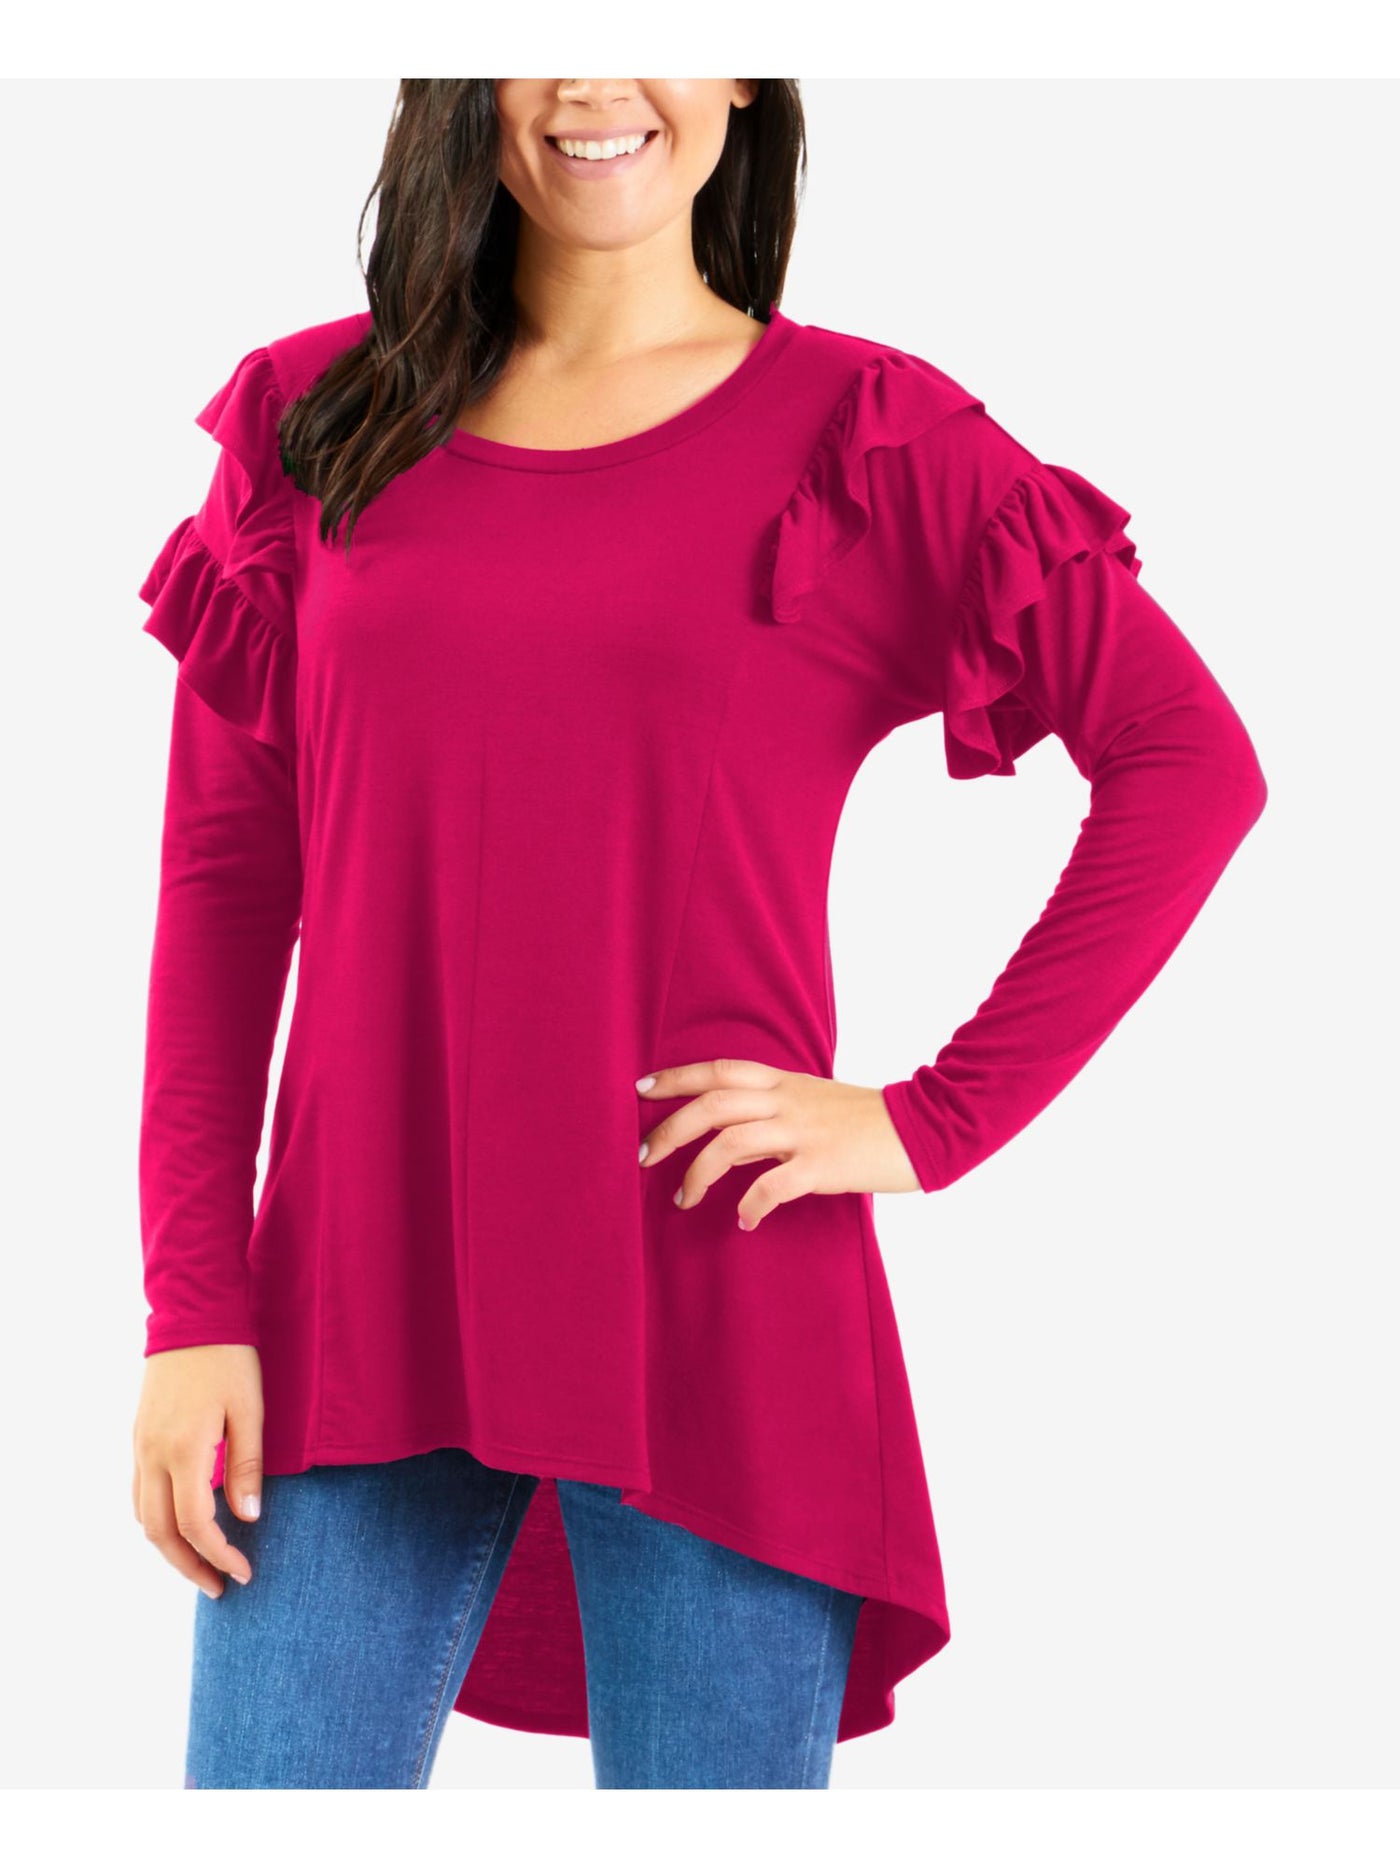 NY COLLECTION Womens Pink Ruffled Long Sleeve Jewel Neck Top S